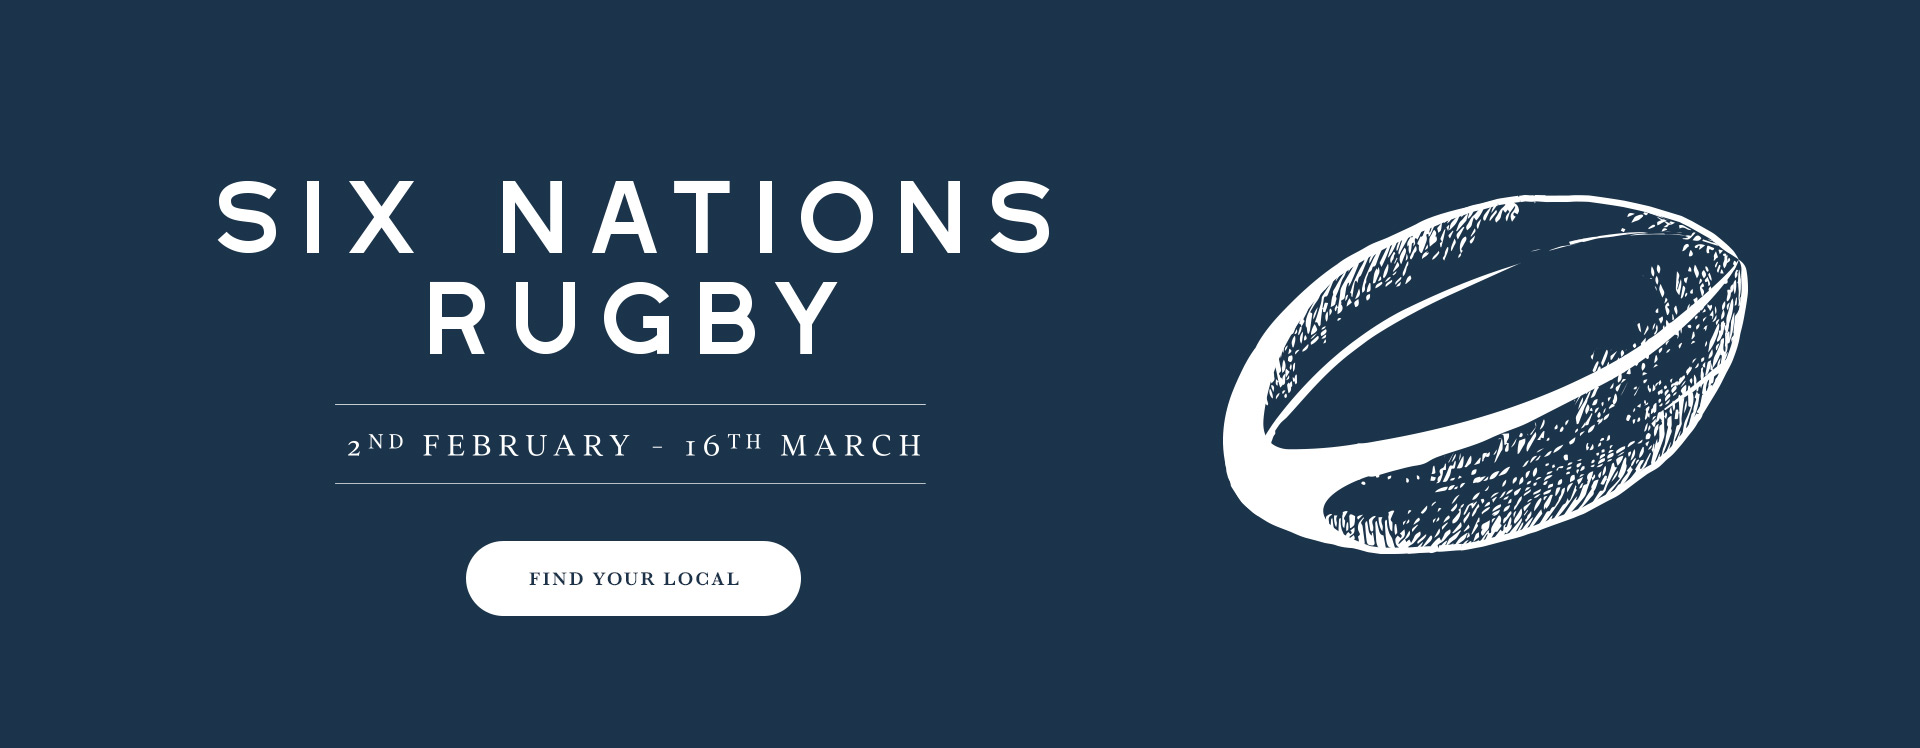 nic-2024-sixnationsrugby-banner-findyourlocal.jpg